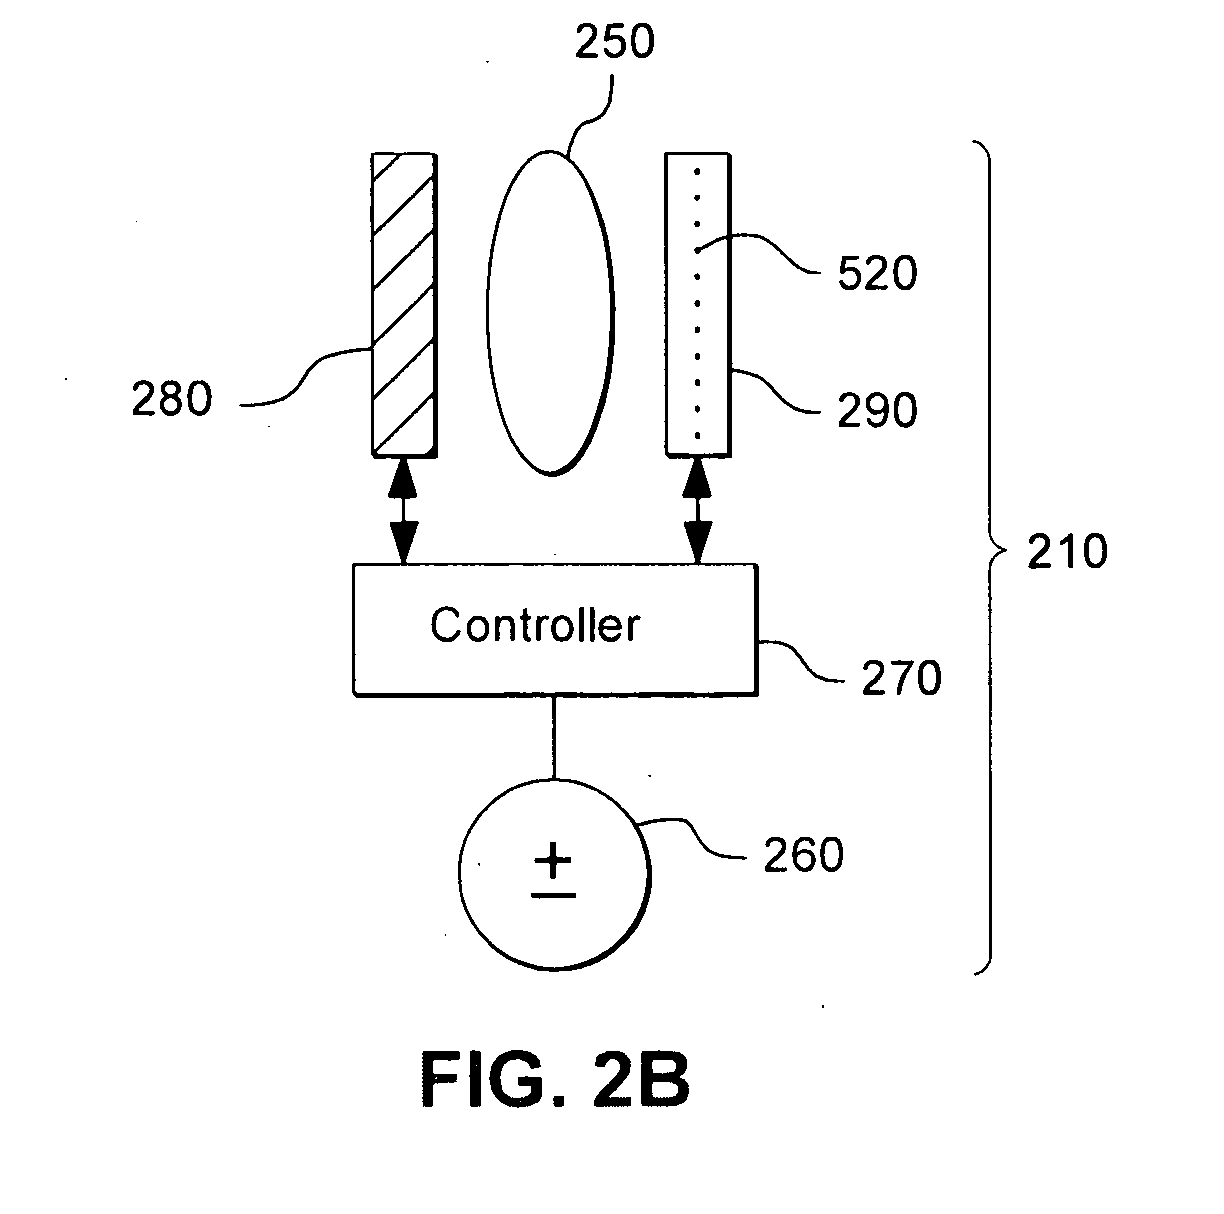 Multi-focal intraocular lens system and methods